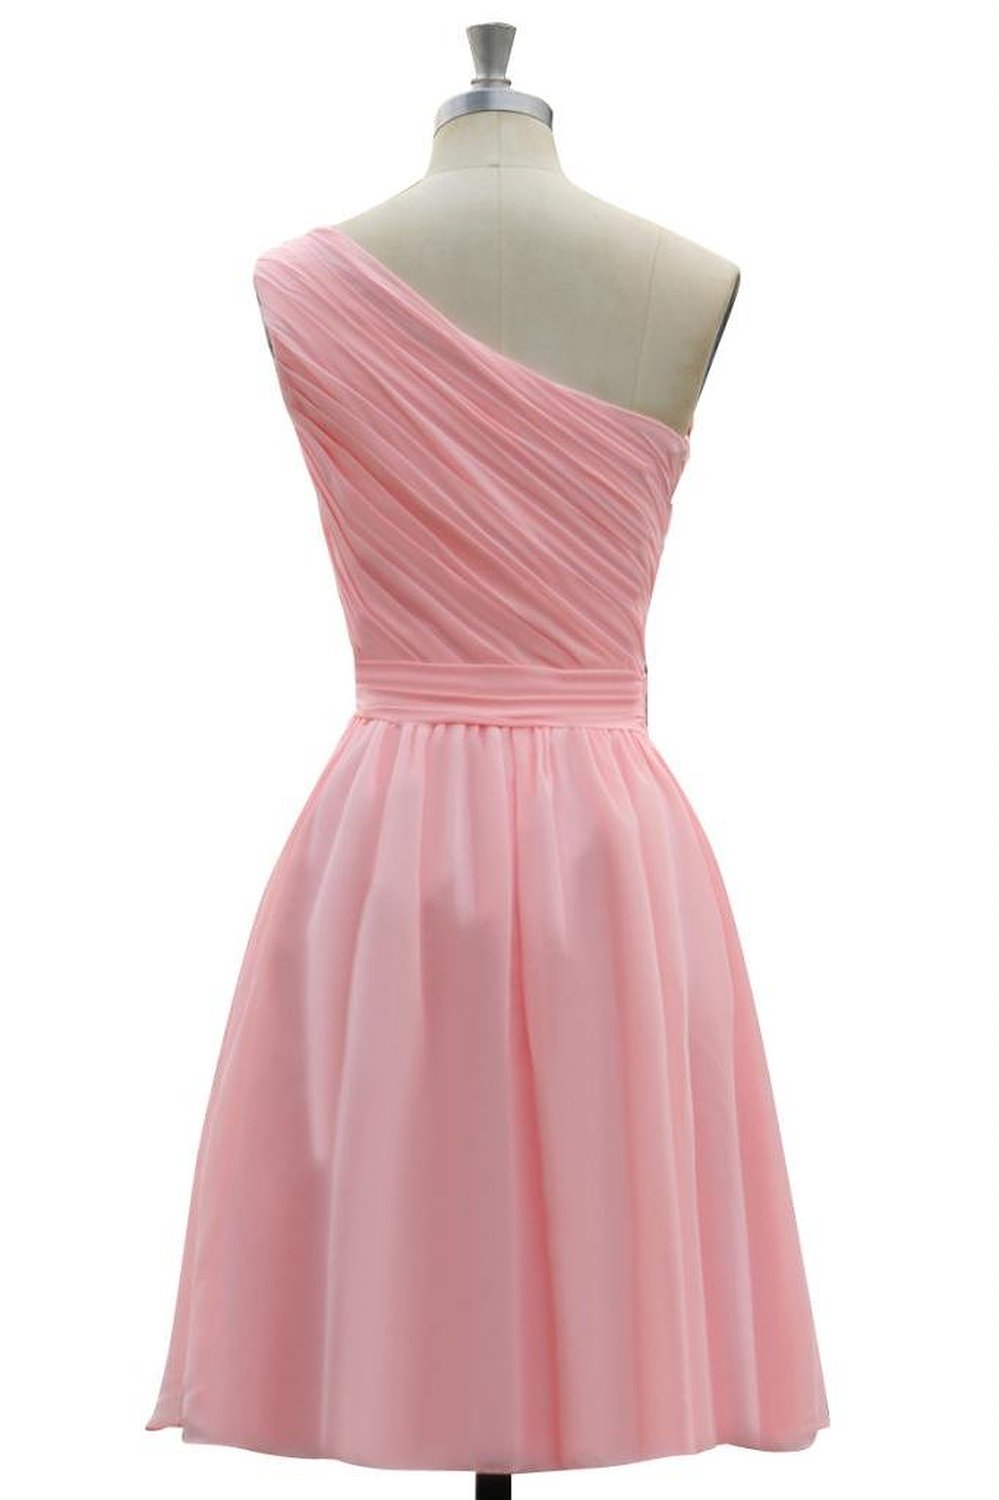 Lovely Simple Short Chiffon One Shoulder Bridesmaid Dress, Cute Party Dress